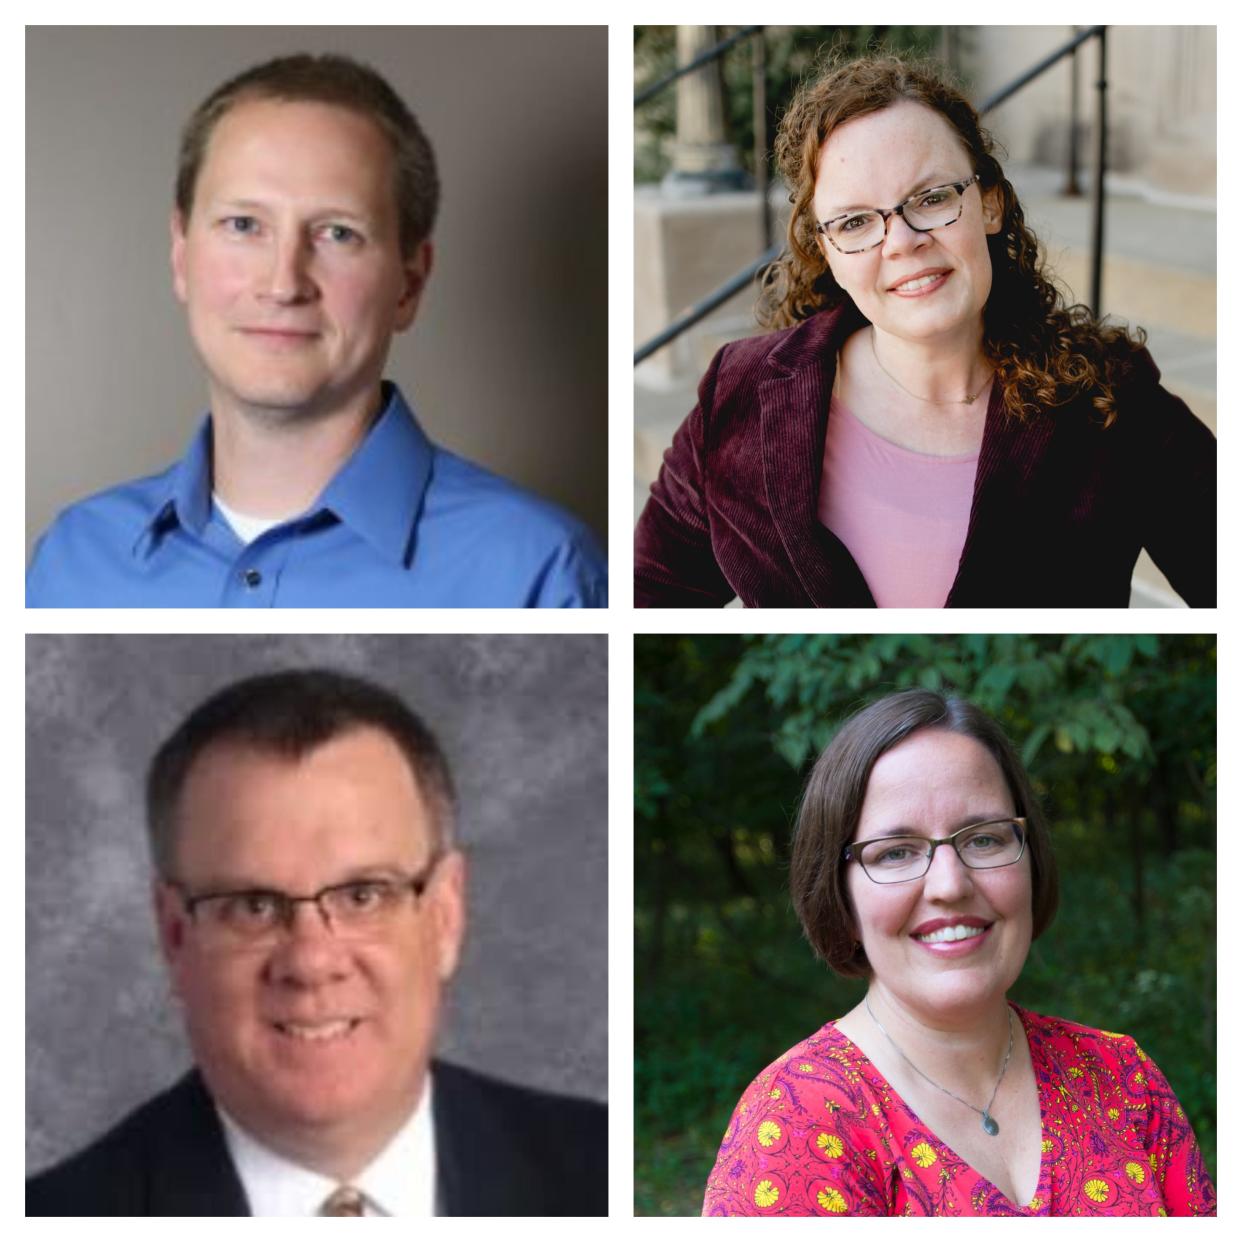 Allen Bierbaum, Angie DeWaard, William Scott Dryer and Sabrina Shields-Cook were elected to the Ames School Board in Tuesday's election.